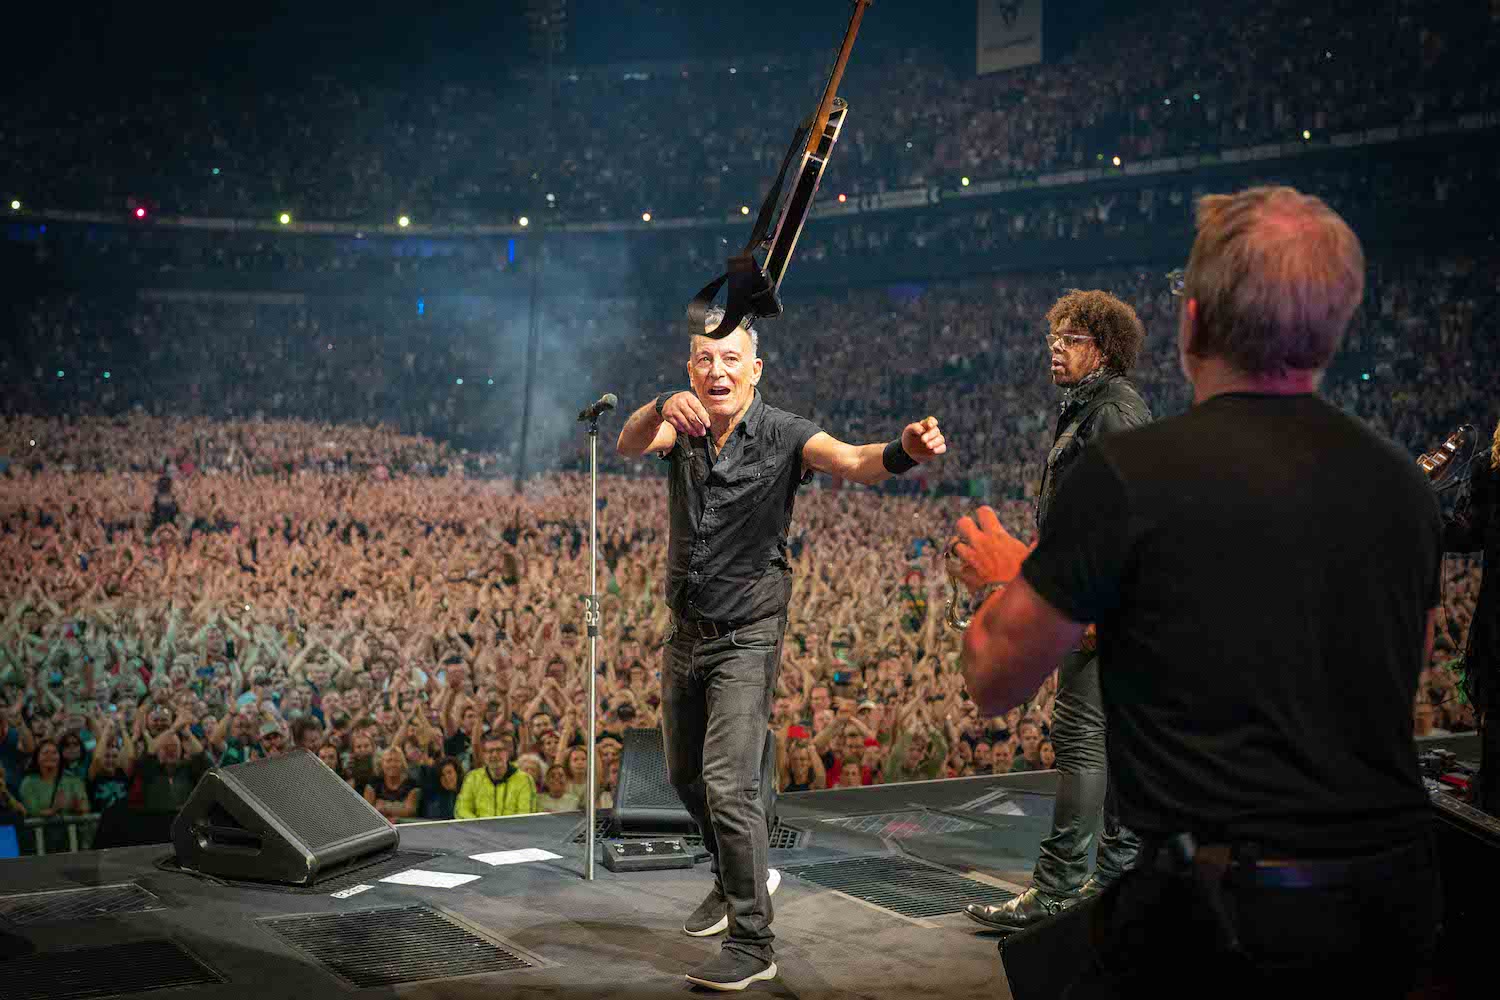 Bruce Springsteen & E Street Band at La Défense Arena, Paris, France on May 15, 2023.